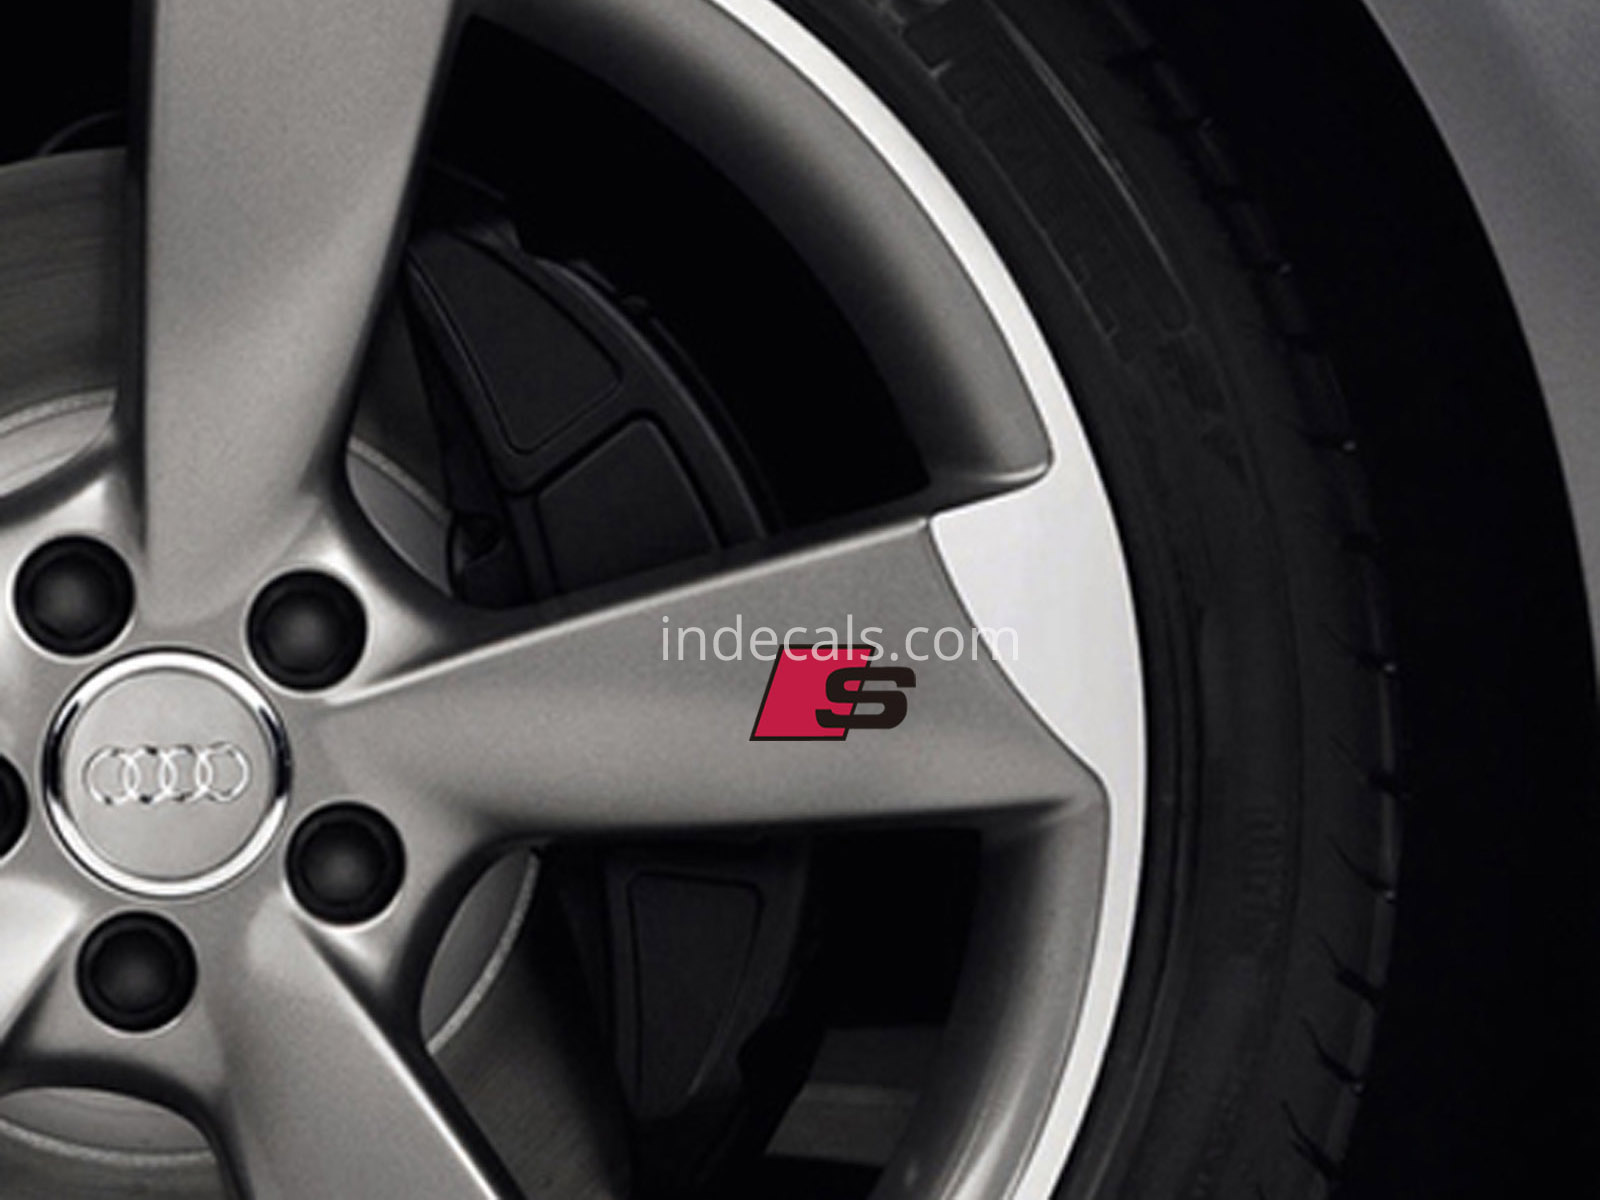 5 x Audi S-Line Stickers for Wheels - Black + Red